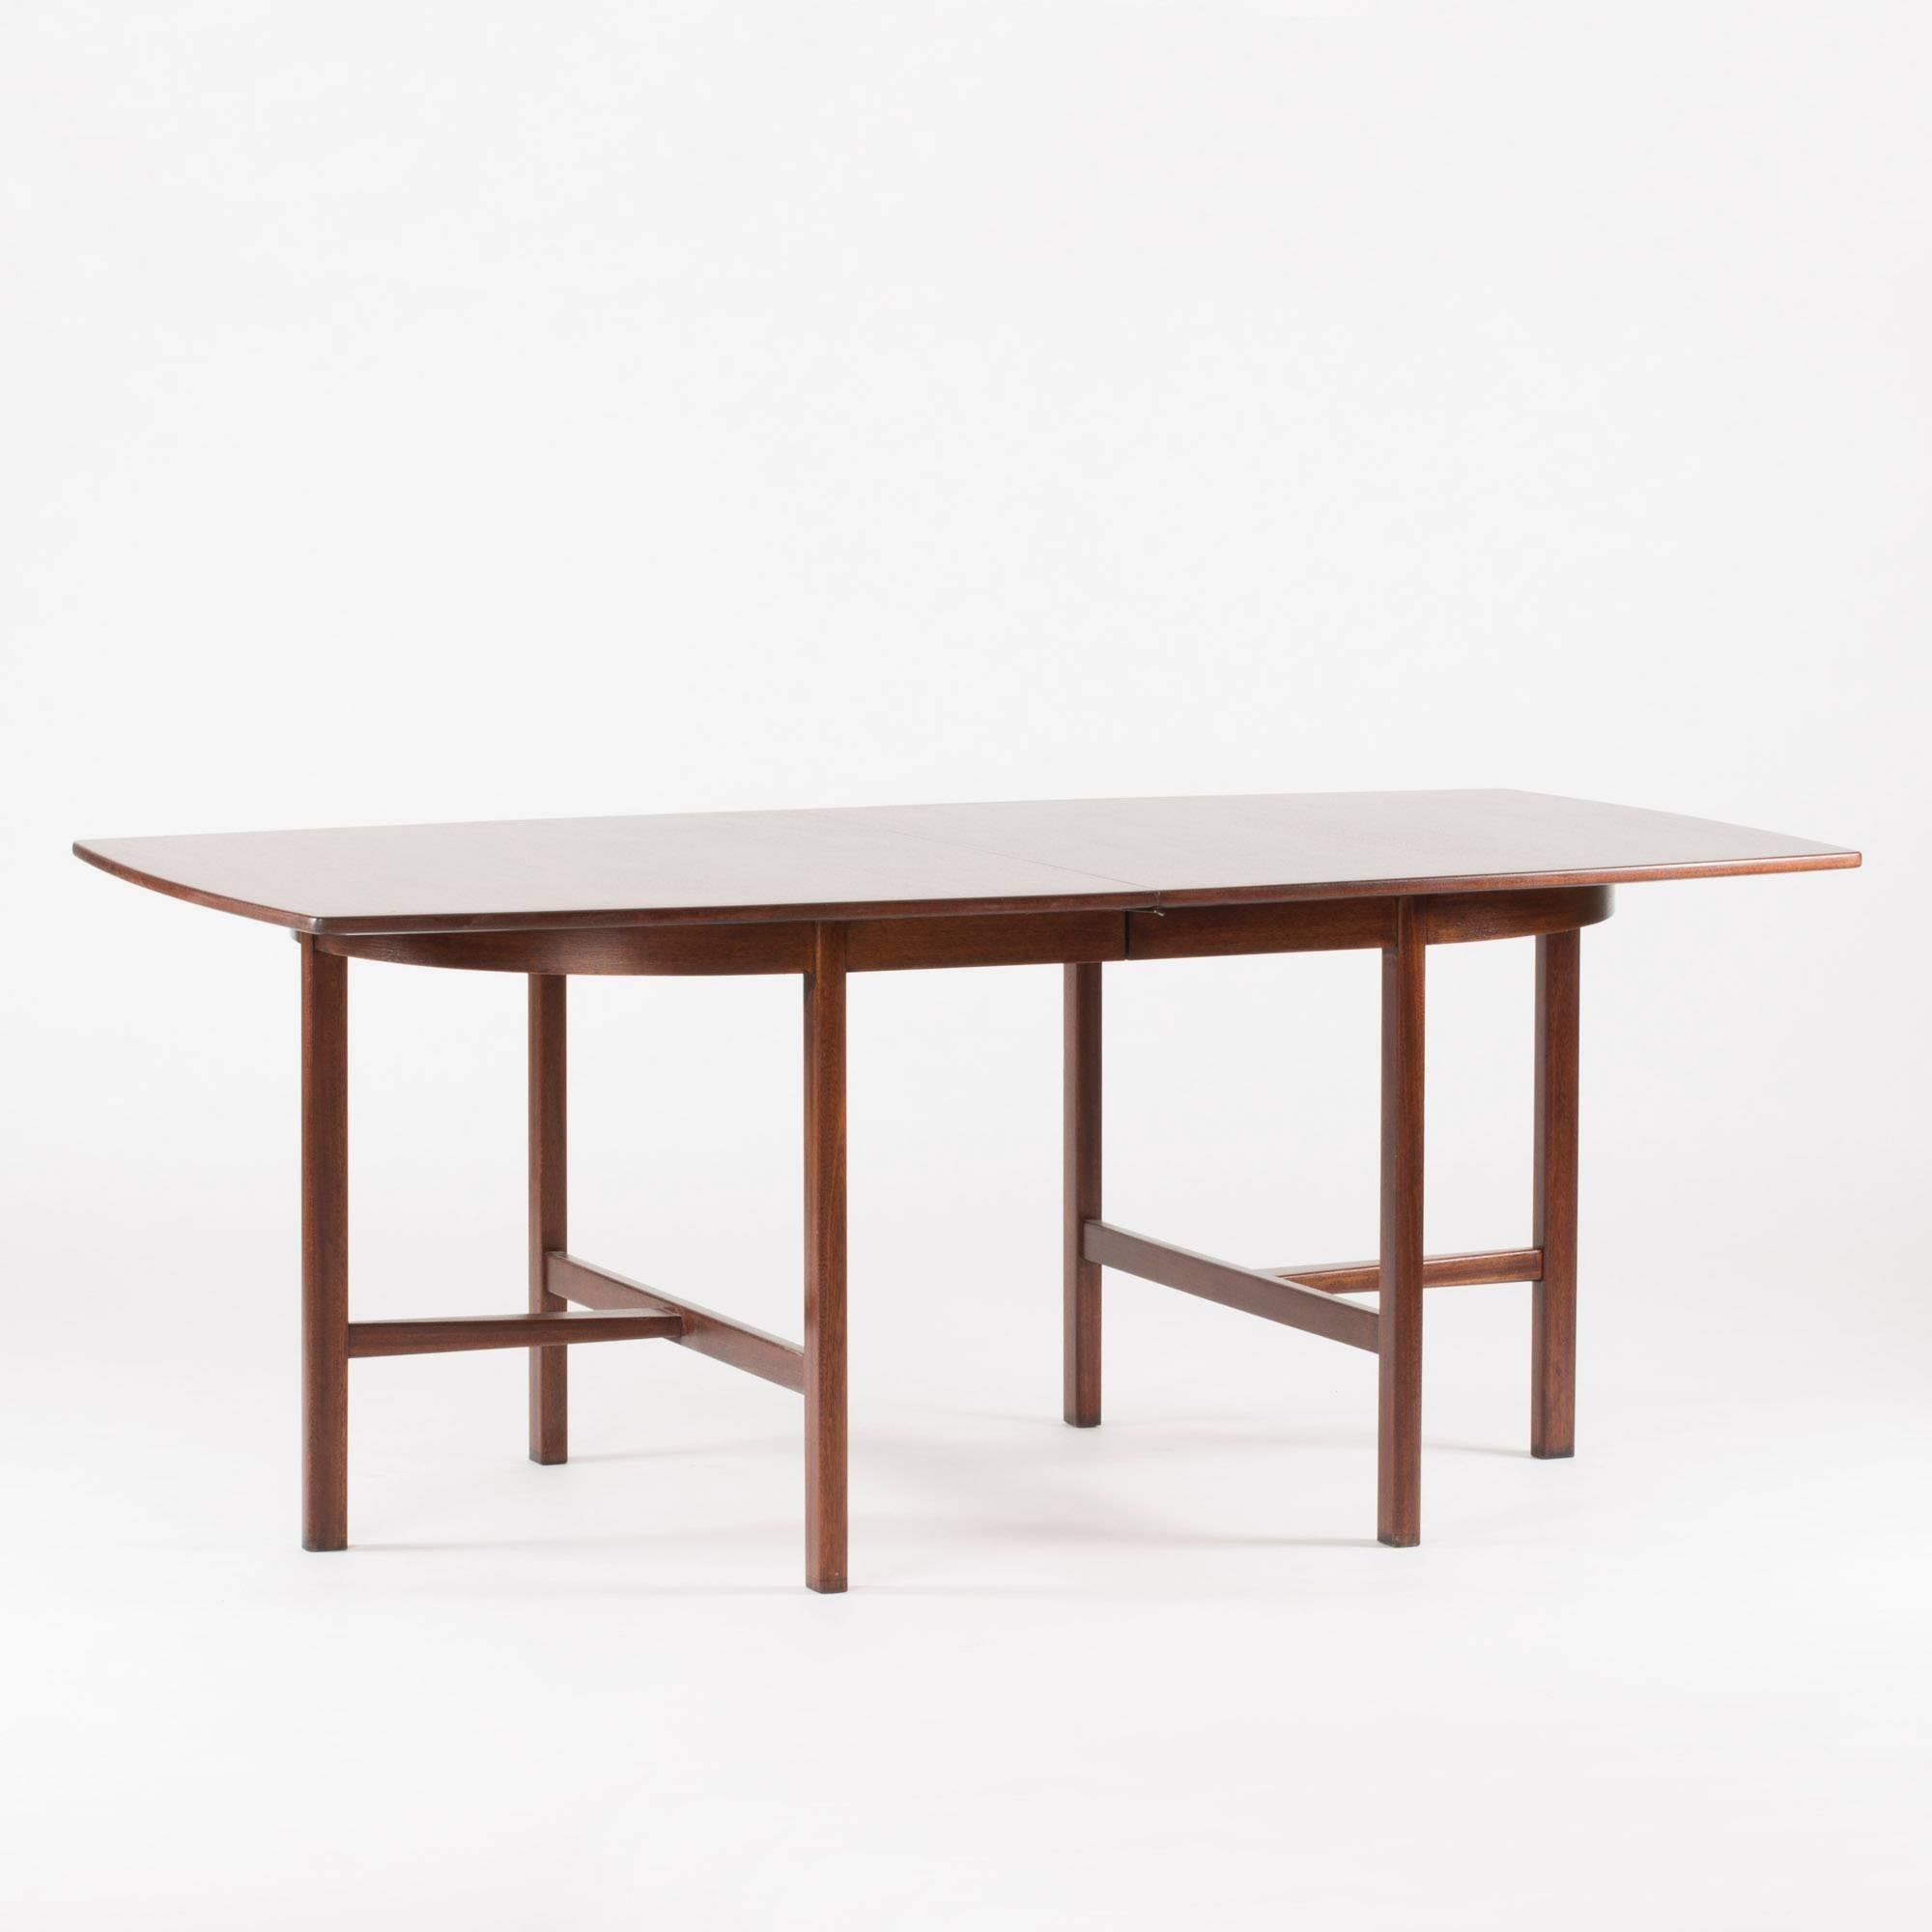 Mahogany dining table by Carl-Axel Acking, with strict, T-shaped legs. The middle bars of the Ts narrow off with subtle elegance where they meet the top bars. The table includes two extra leaves, each 55 cm long, that extends it to a total length of